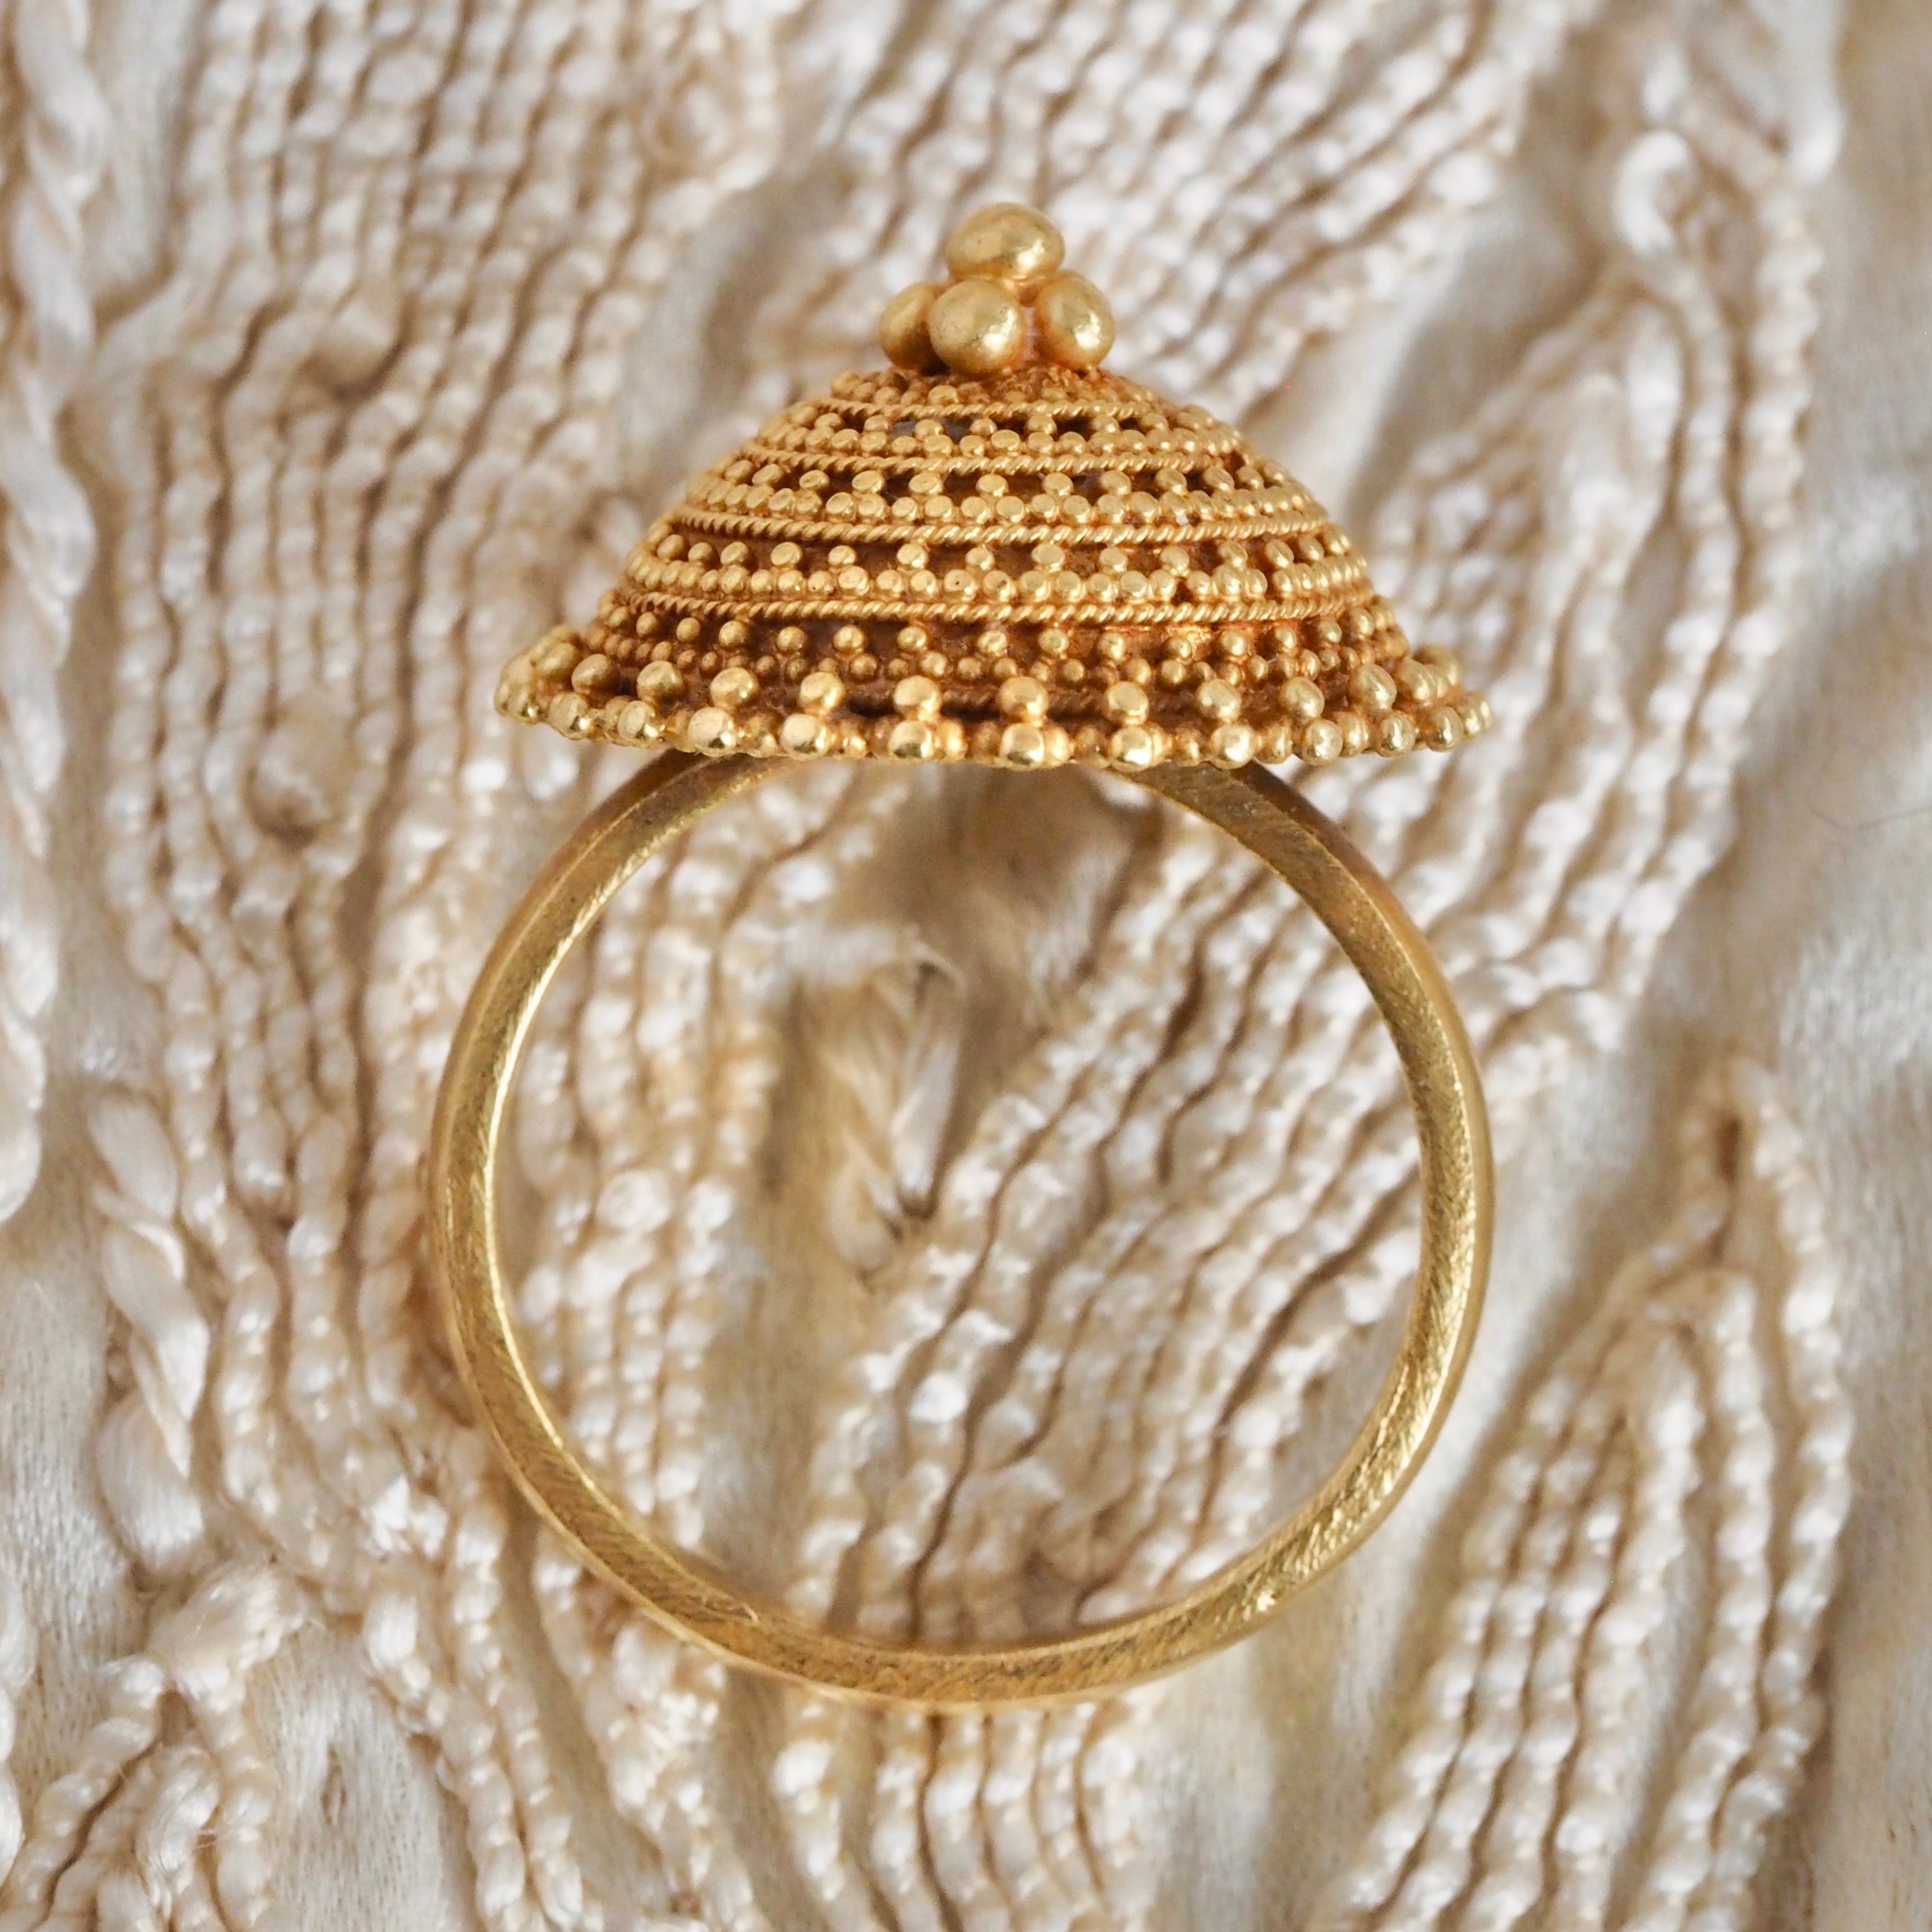 Antique Indian 22k Gold Dome Ring